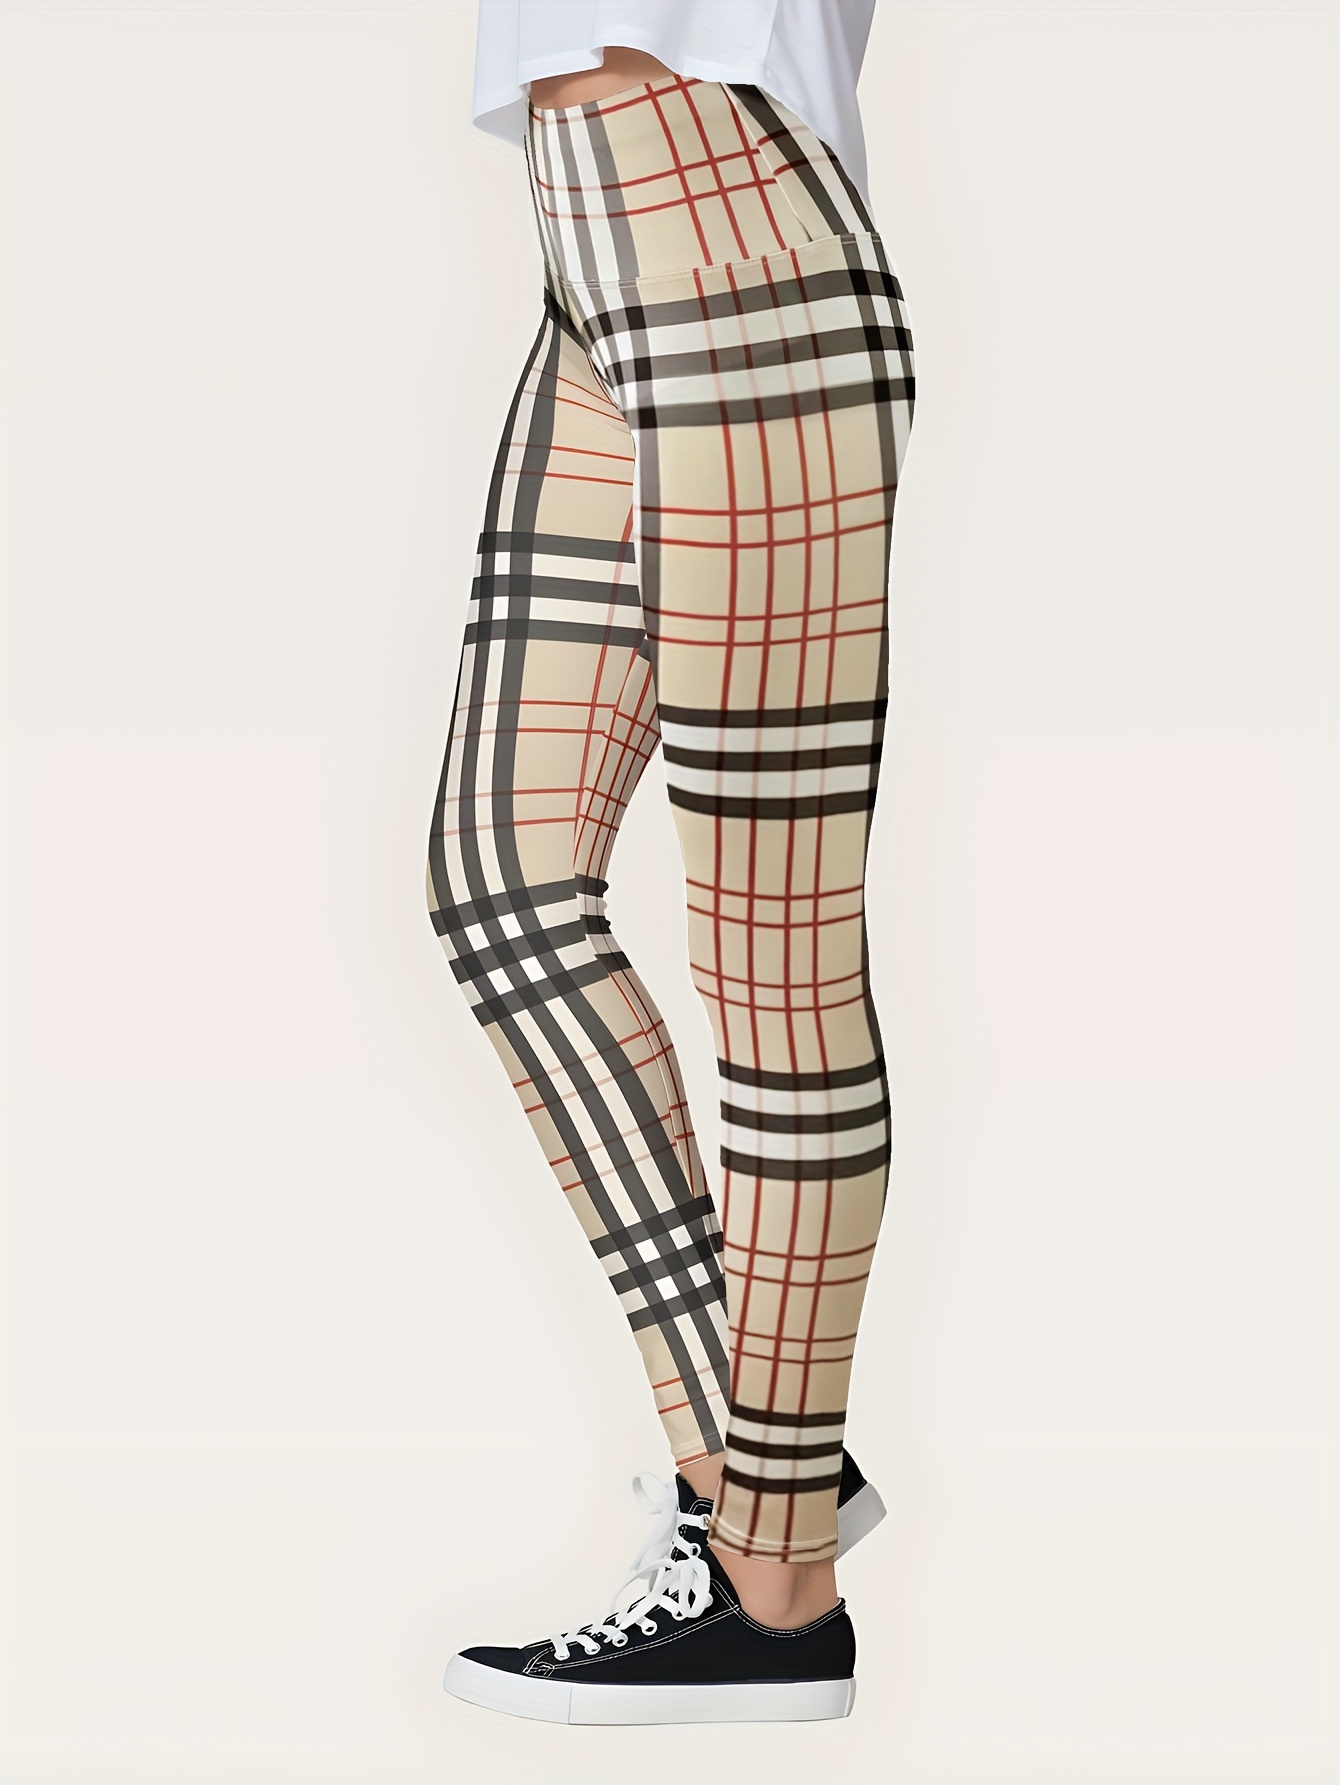 Checkerboard Plaid Print Workout Yoga Tight Pants, Stretchy Fitness Running  Sports Leggings, Women's Activewear